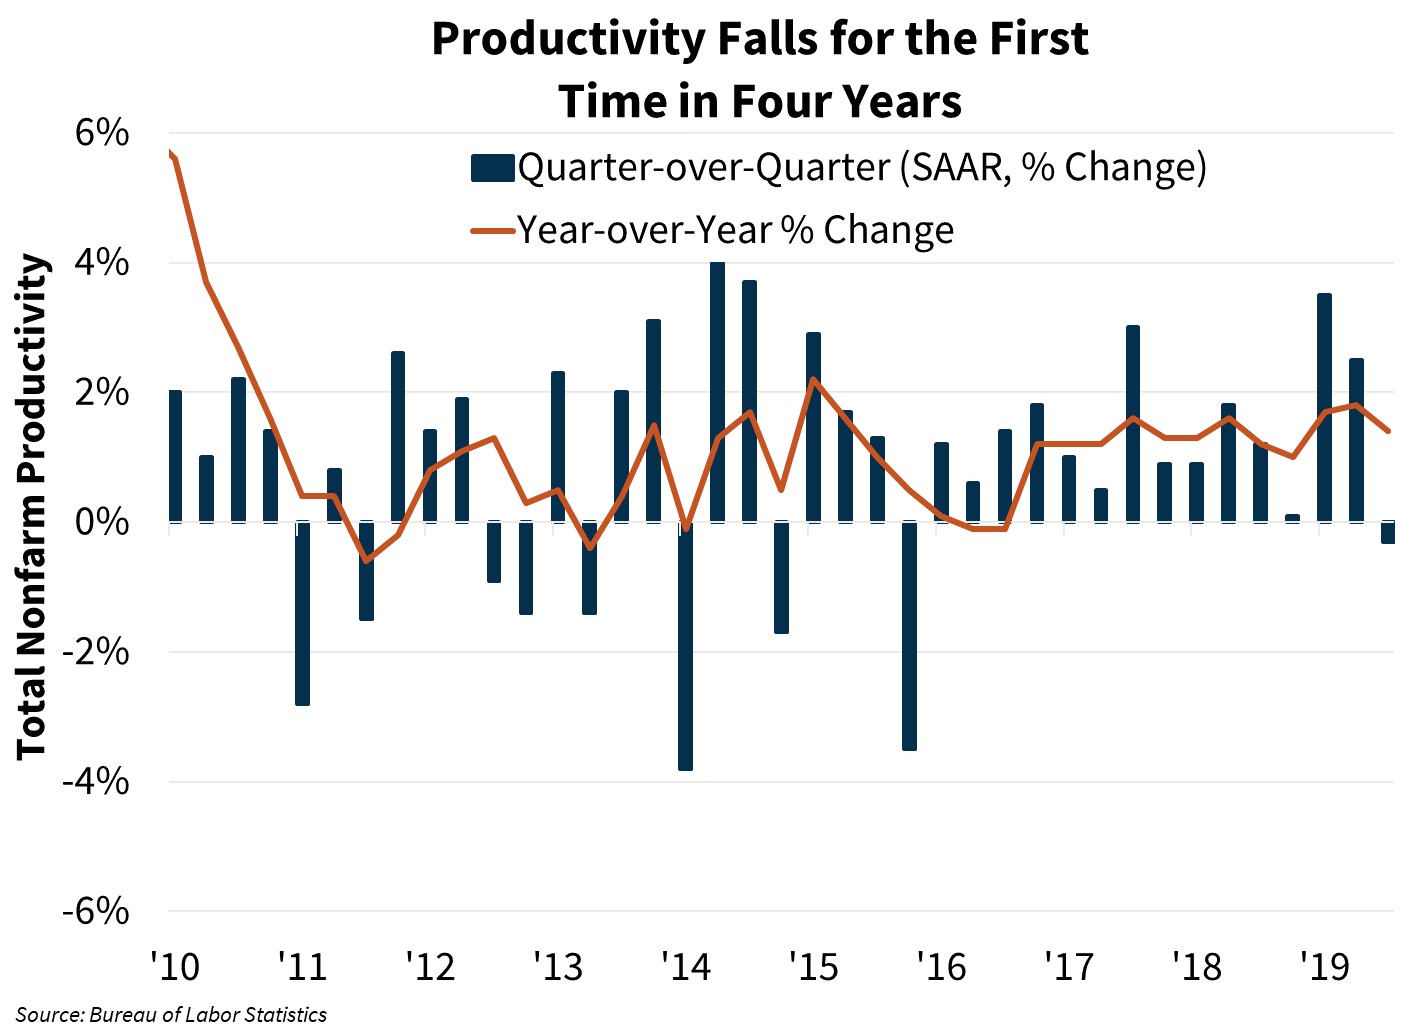 Productivity Falls for the First Time in Four Years